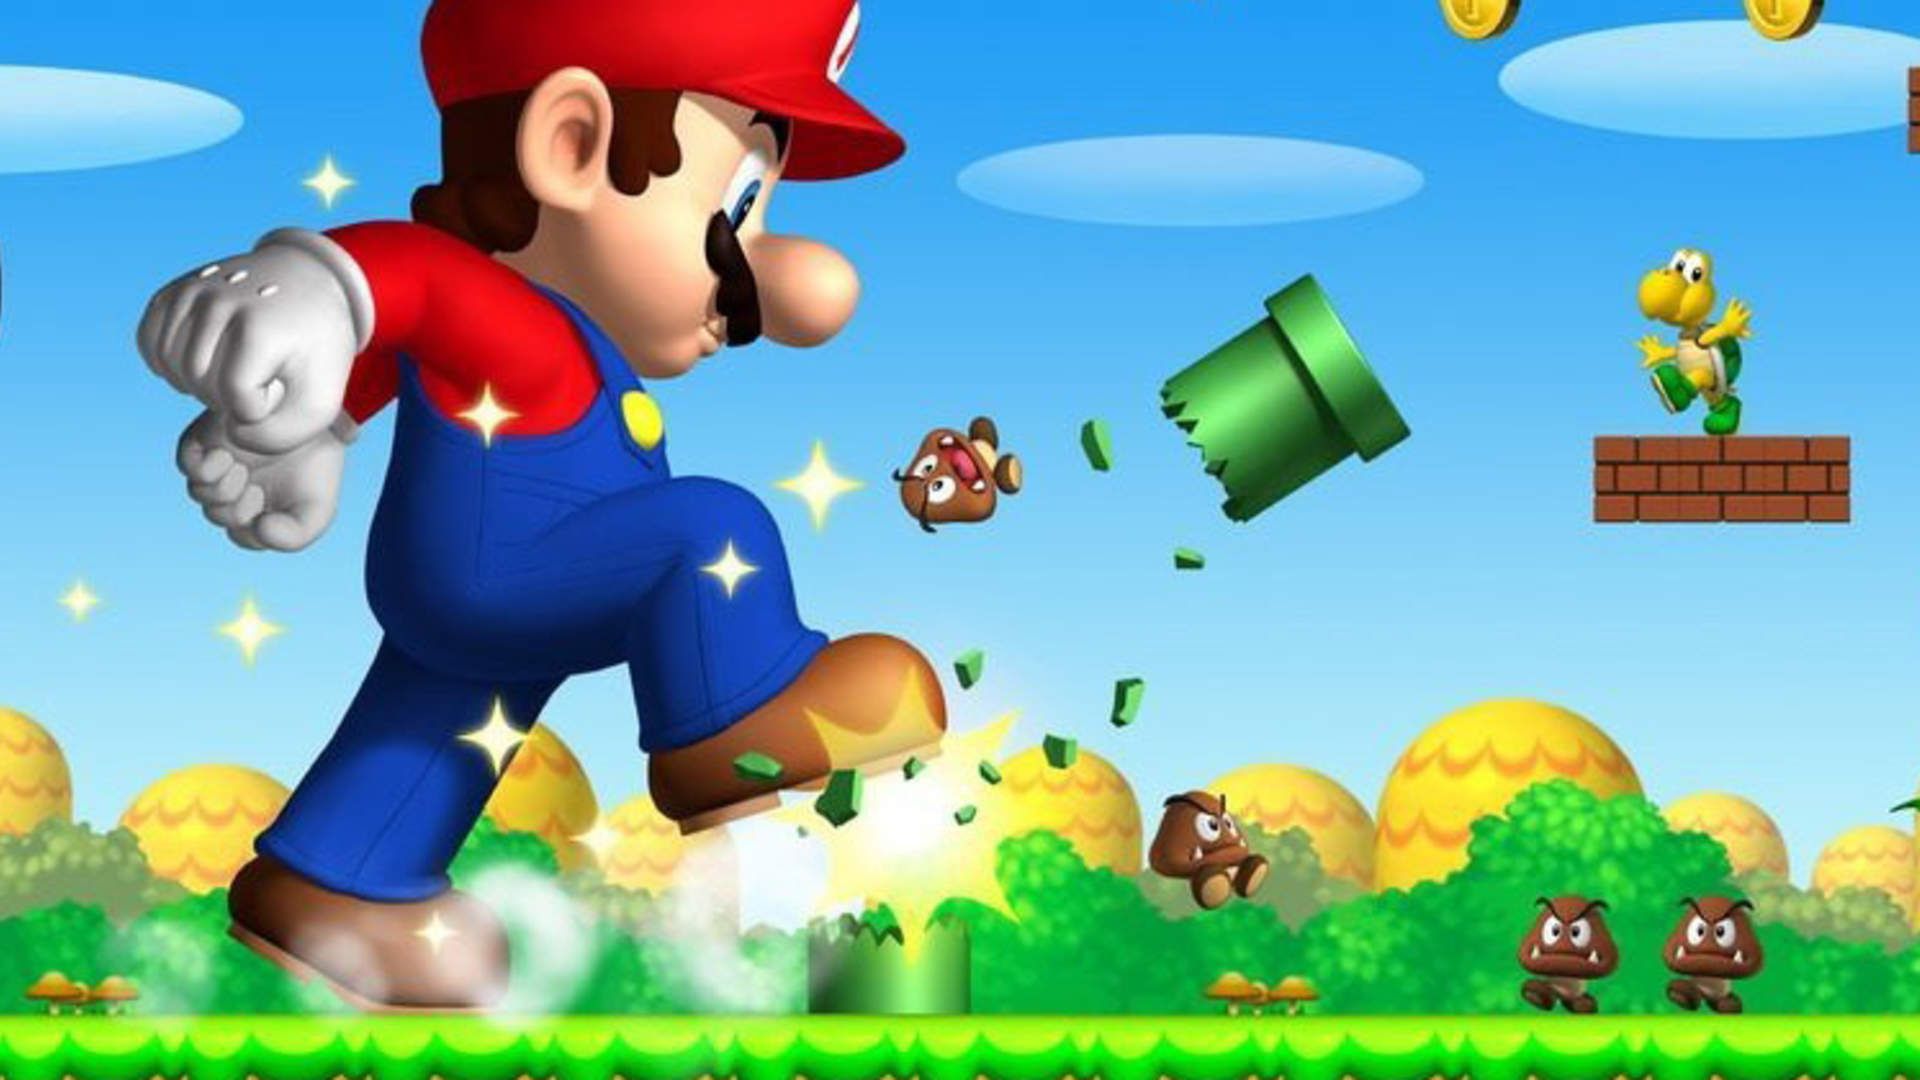 Years Ago, New Super Mario Bros. Made Old School Cool Or